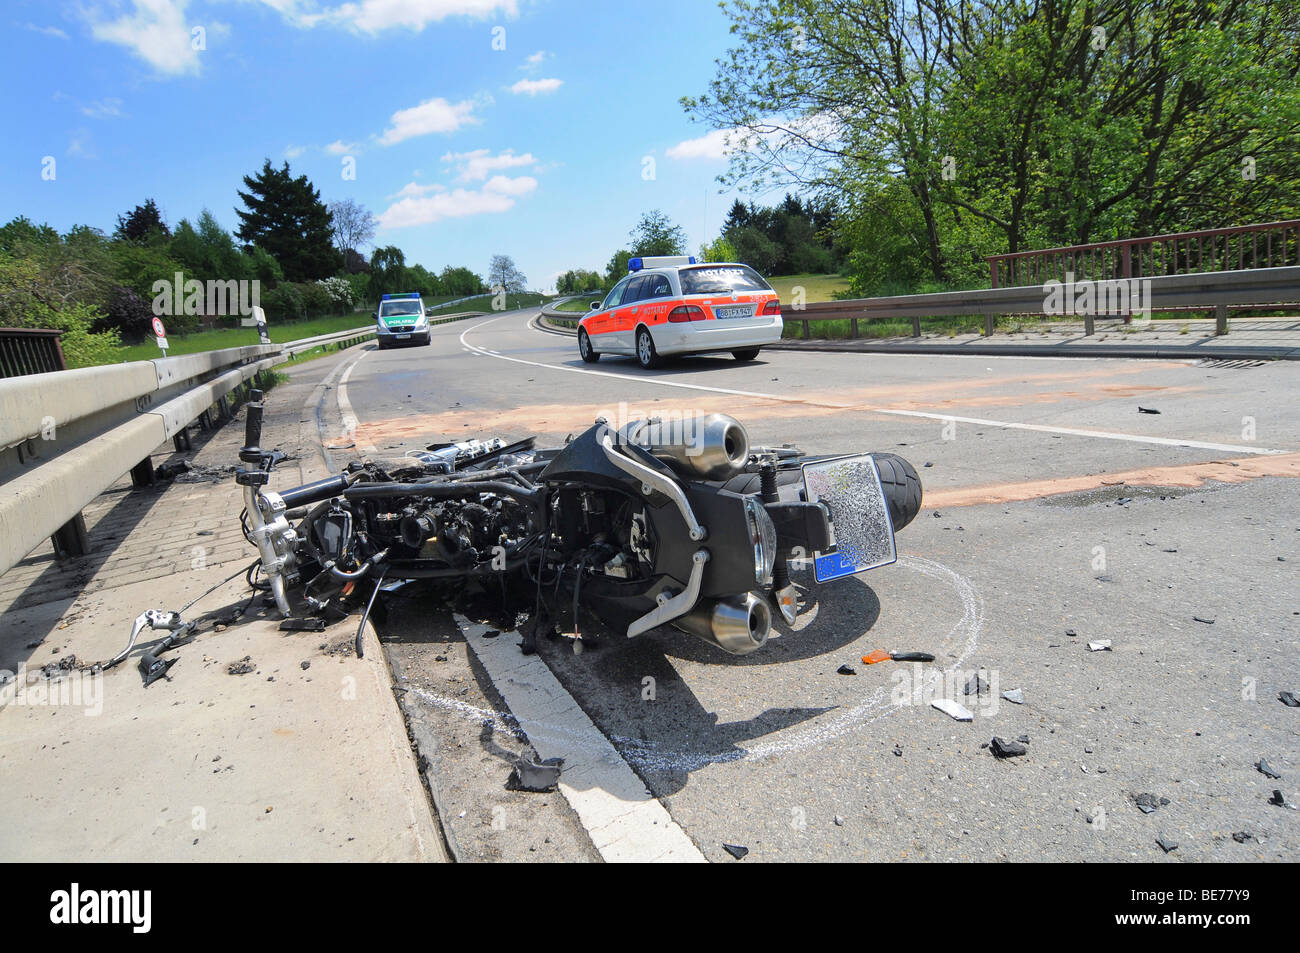 Motorcycle gutted by fire, fatal motorcycle accident on the K 1059 Hoefingen between Hoefingen and Gebersheim, the victim was h Stock Photo